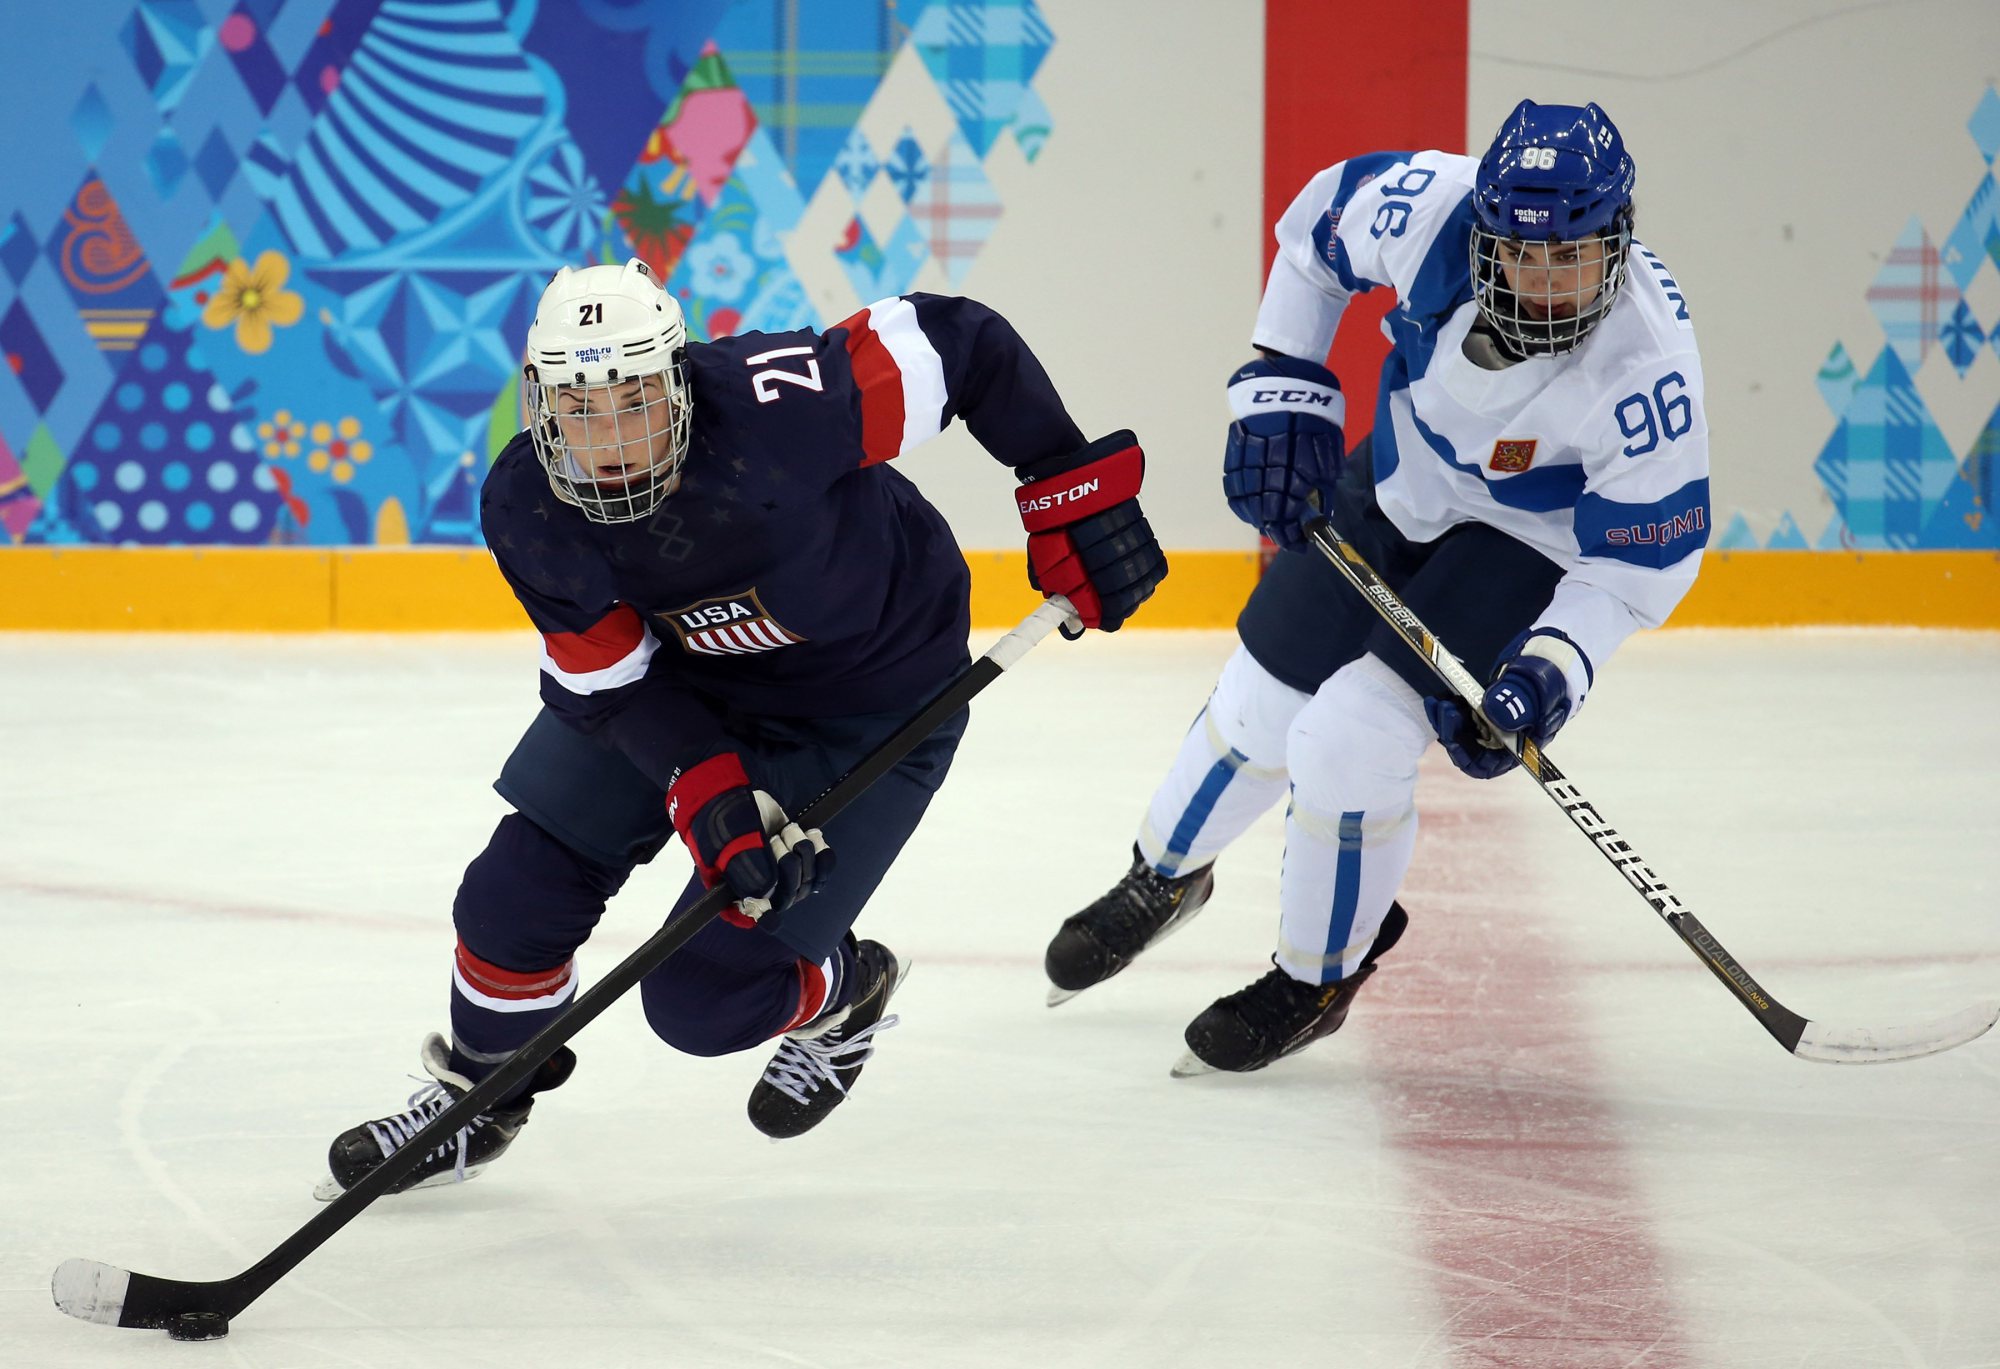 From left: U.S. forward Hilary Knight (21) skates ahead of Finland's Emma Nuutinen (96) during the second period in a women's hockey game at the 2014 Winter Olympics in Sochi, on Feb. 8, 2014.